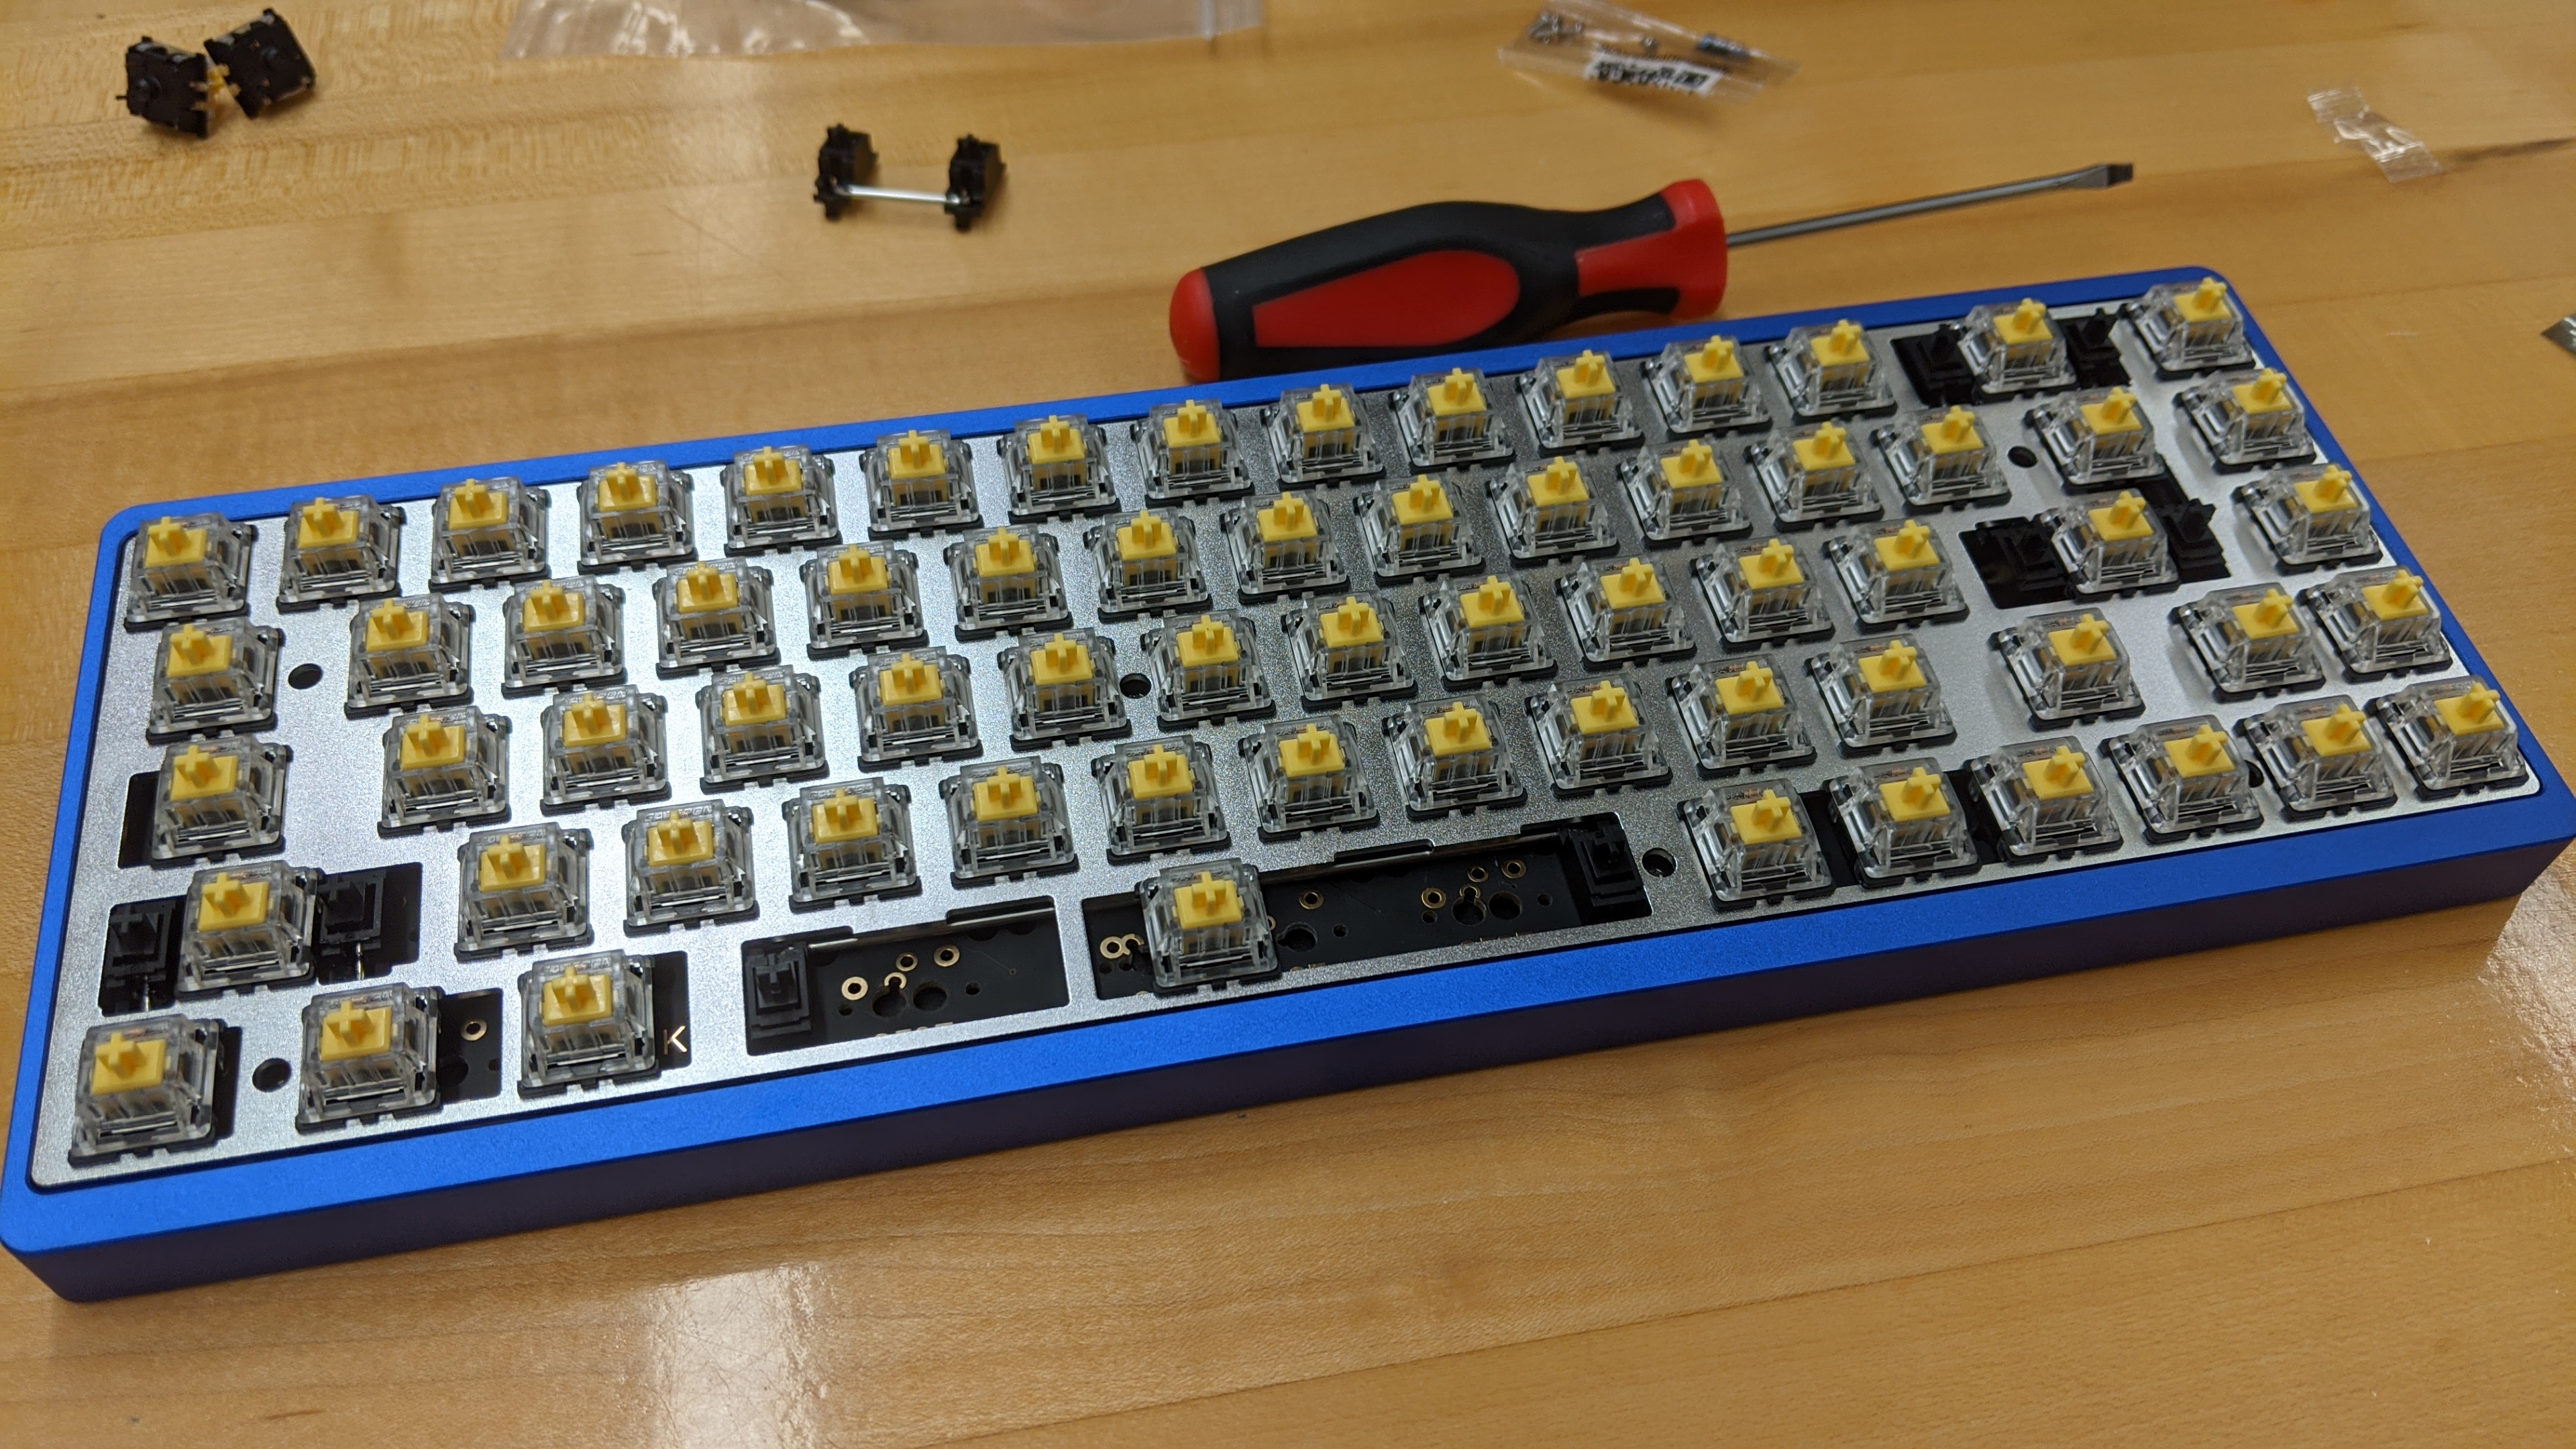 The assembled board, fit snugly into the case. The switches are still exposed.